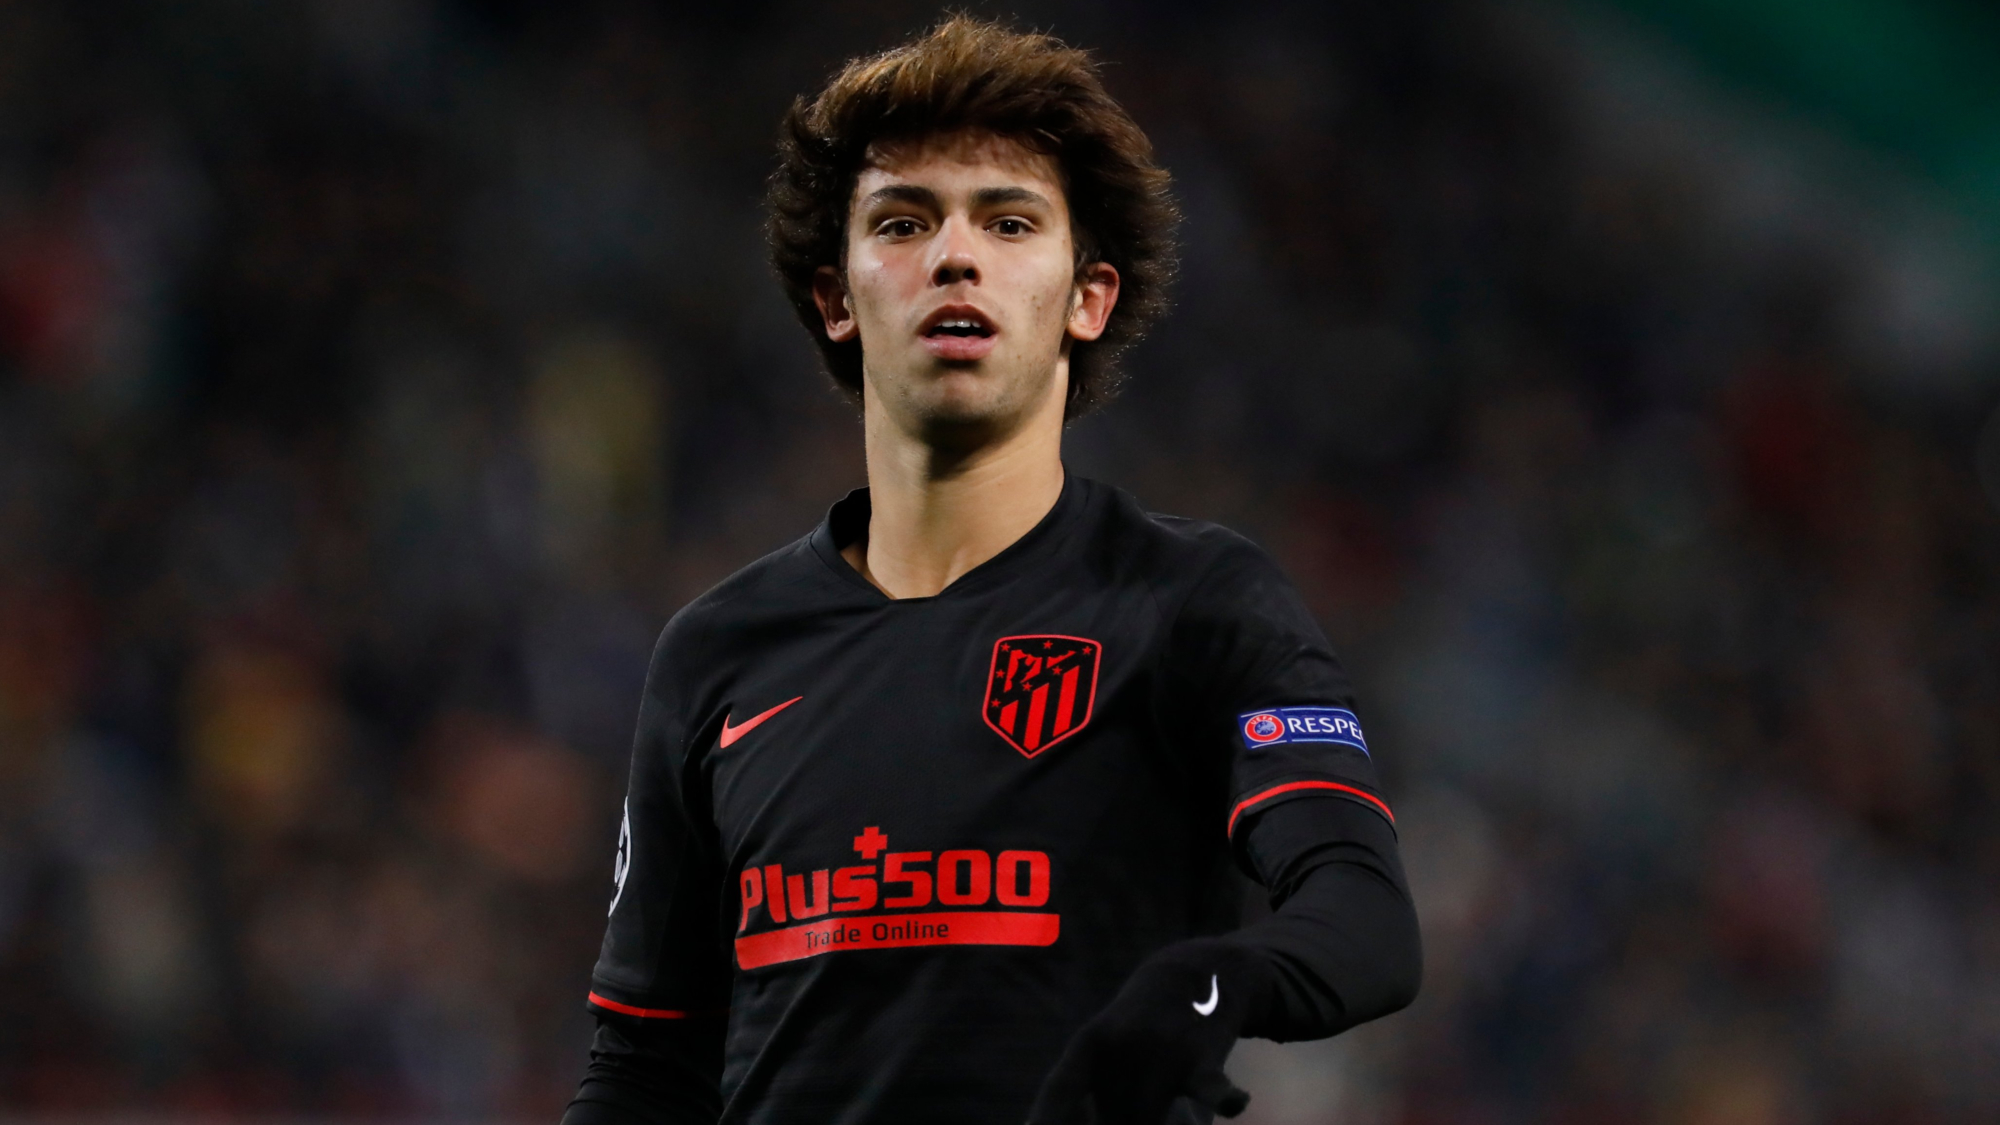 Joao Felix 2021 Wallpaper, HD Sports 4K Wallpapers, Images, Photos and